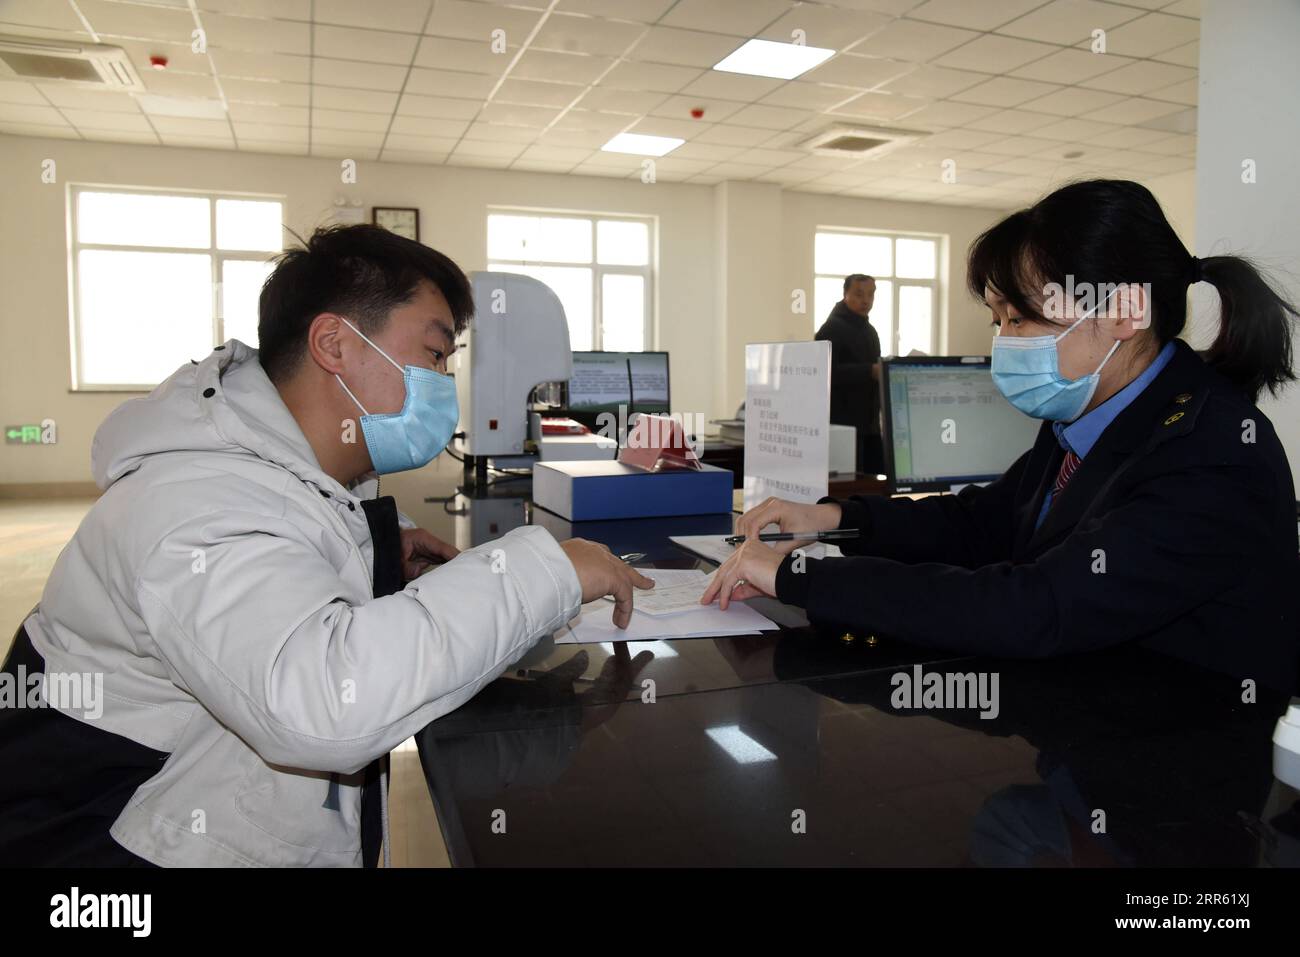 210122 -- JINAN, Jan. 22, 2021 -- A staff member R of the China Railway Jinan Group Co., Ltd. process consignment documents for a cargo owner in Dongjiazhen Township of Jinan City, capital of east China s Shandong Province, Jan. 21, 2021. The China Railway Jinan Group Co., Ltd. has been boosting the business of its Qilu freight trains to Europe and other parts of Asia by steadily streamlining cargo flows in recent years. A total of 1,506 Qilu trains left Shandong in 2020, a year-on-year growth of 42.9 percent. These trains have served as accelerators to Shandong s opening up under the Belt and Stock Photo